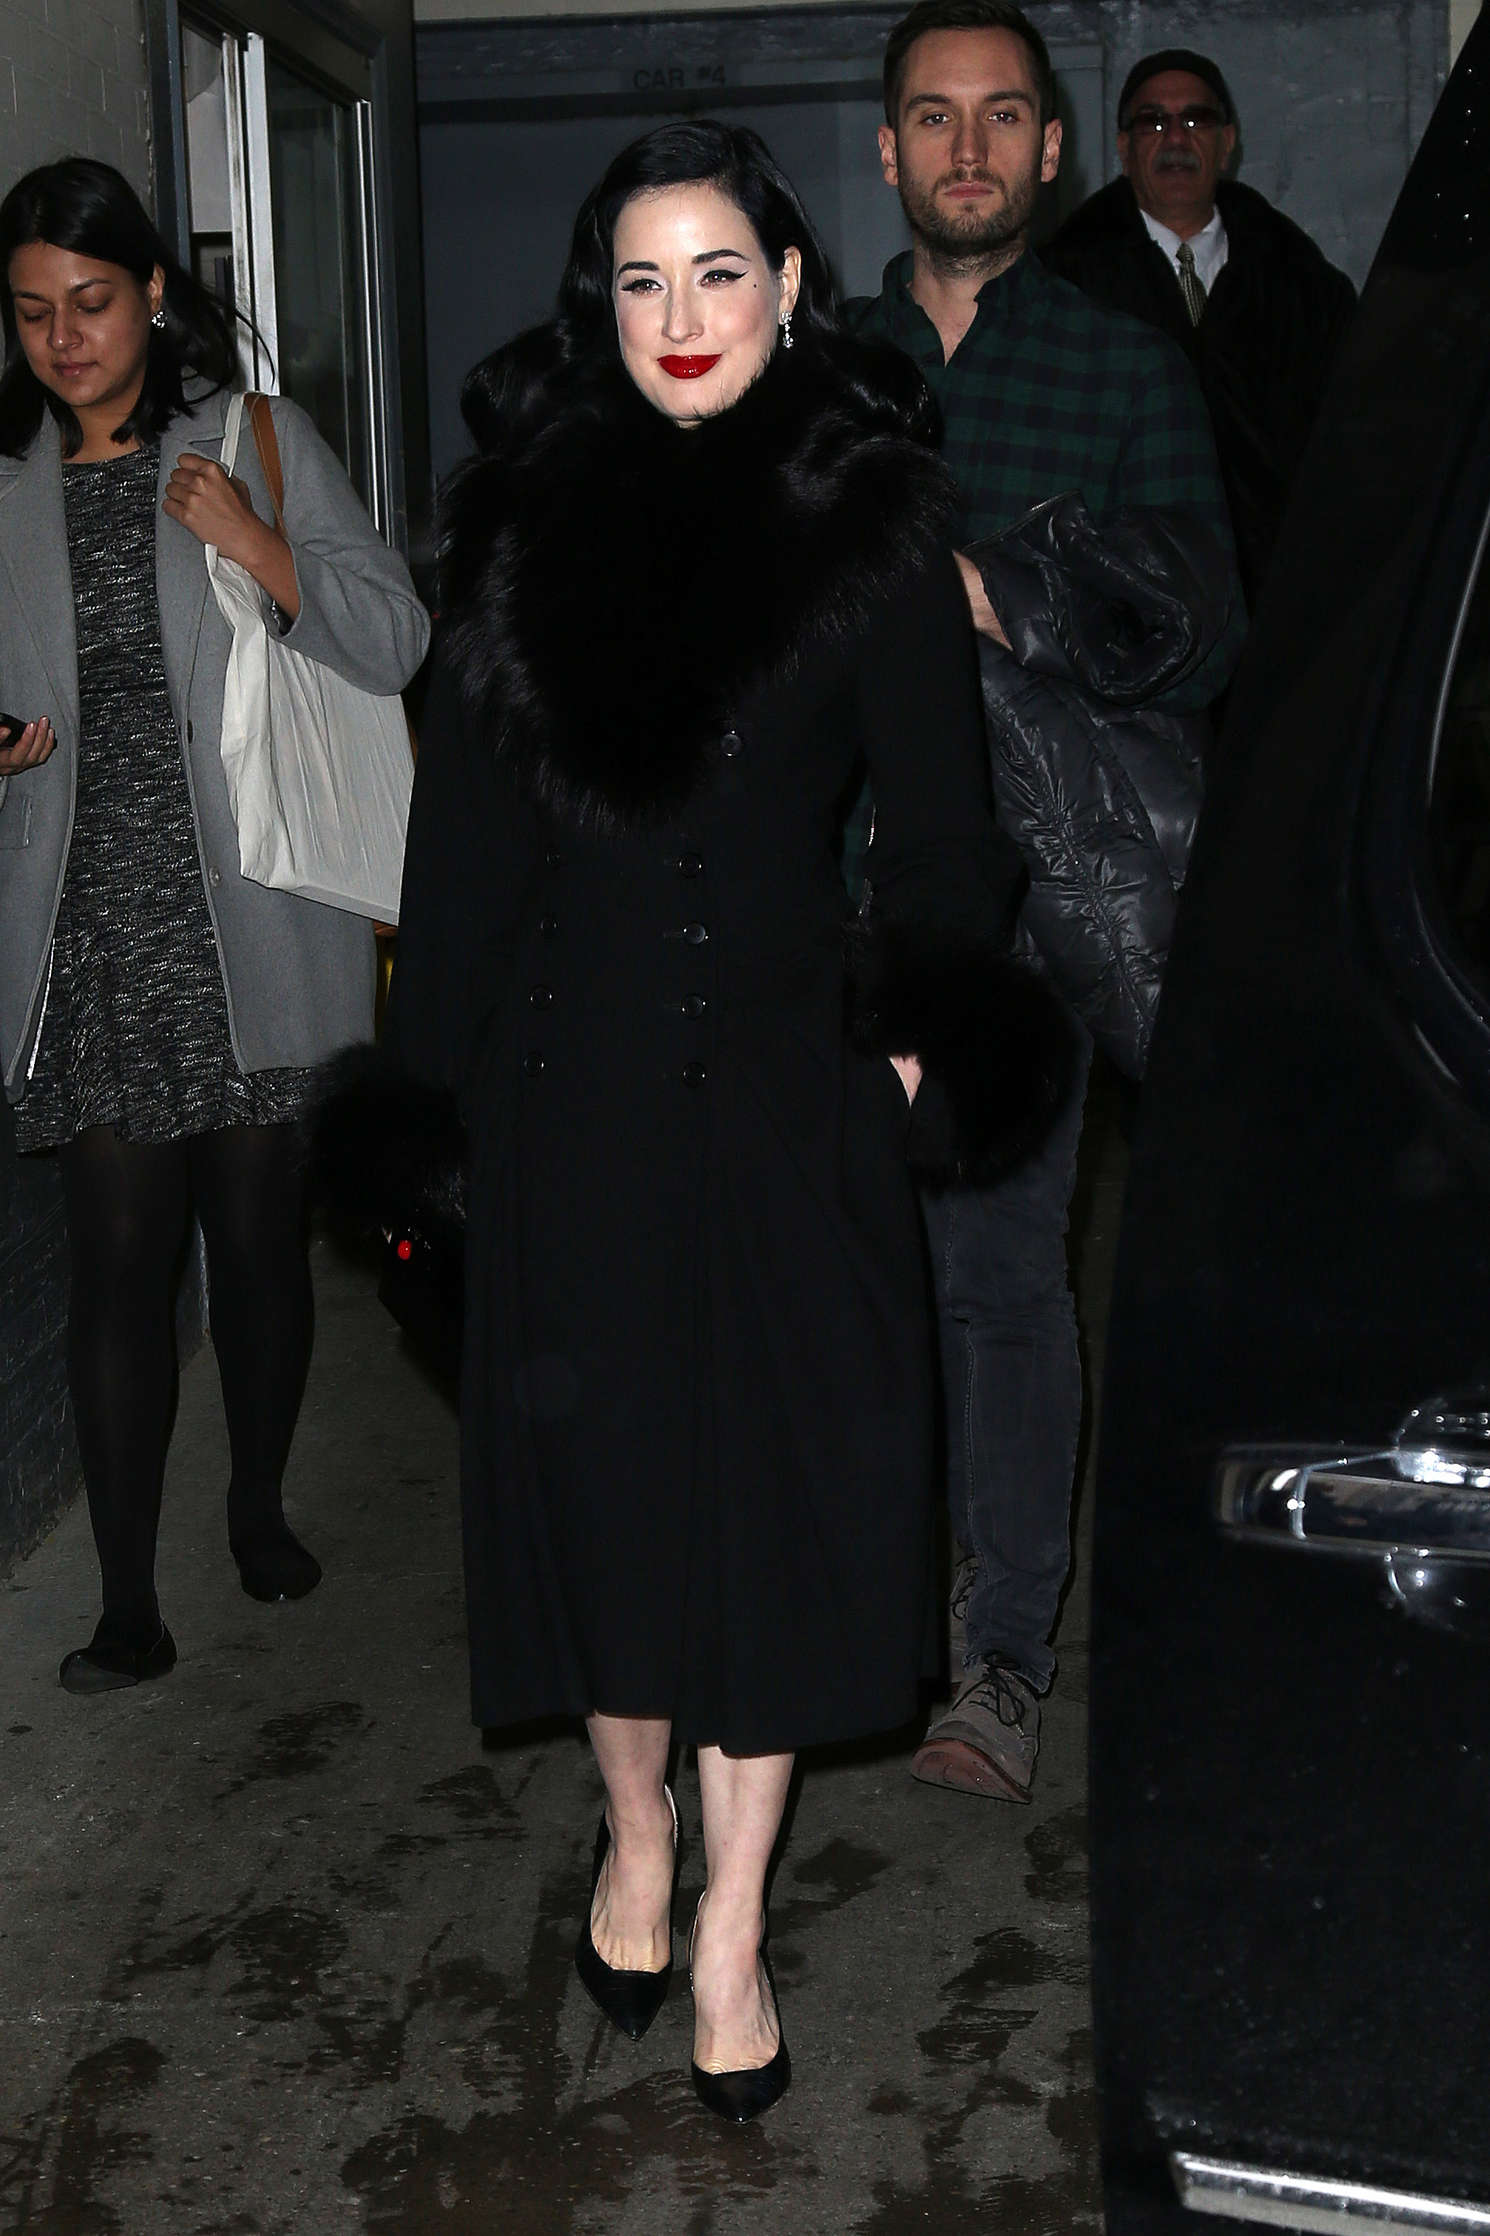 Dita Von Teese: Coming out of Huff Post Live -01 | GotCeleb